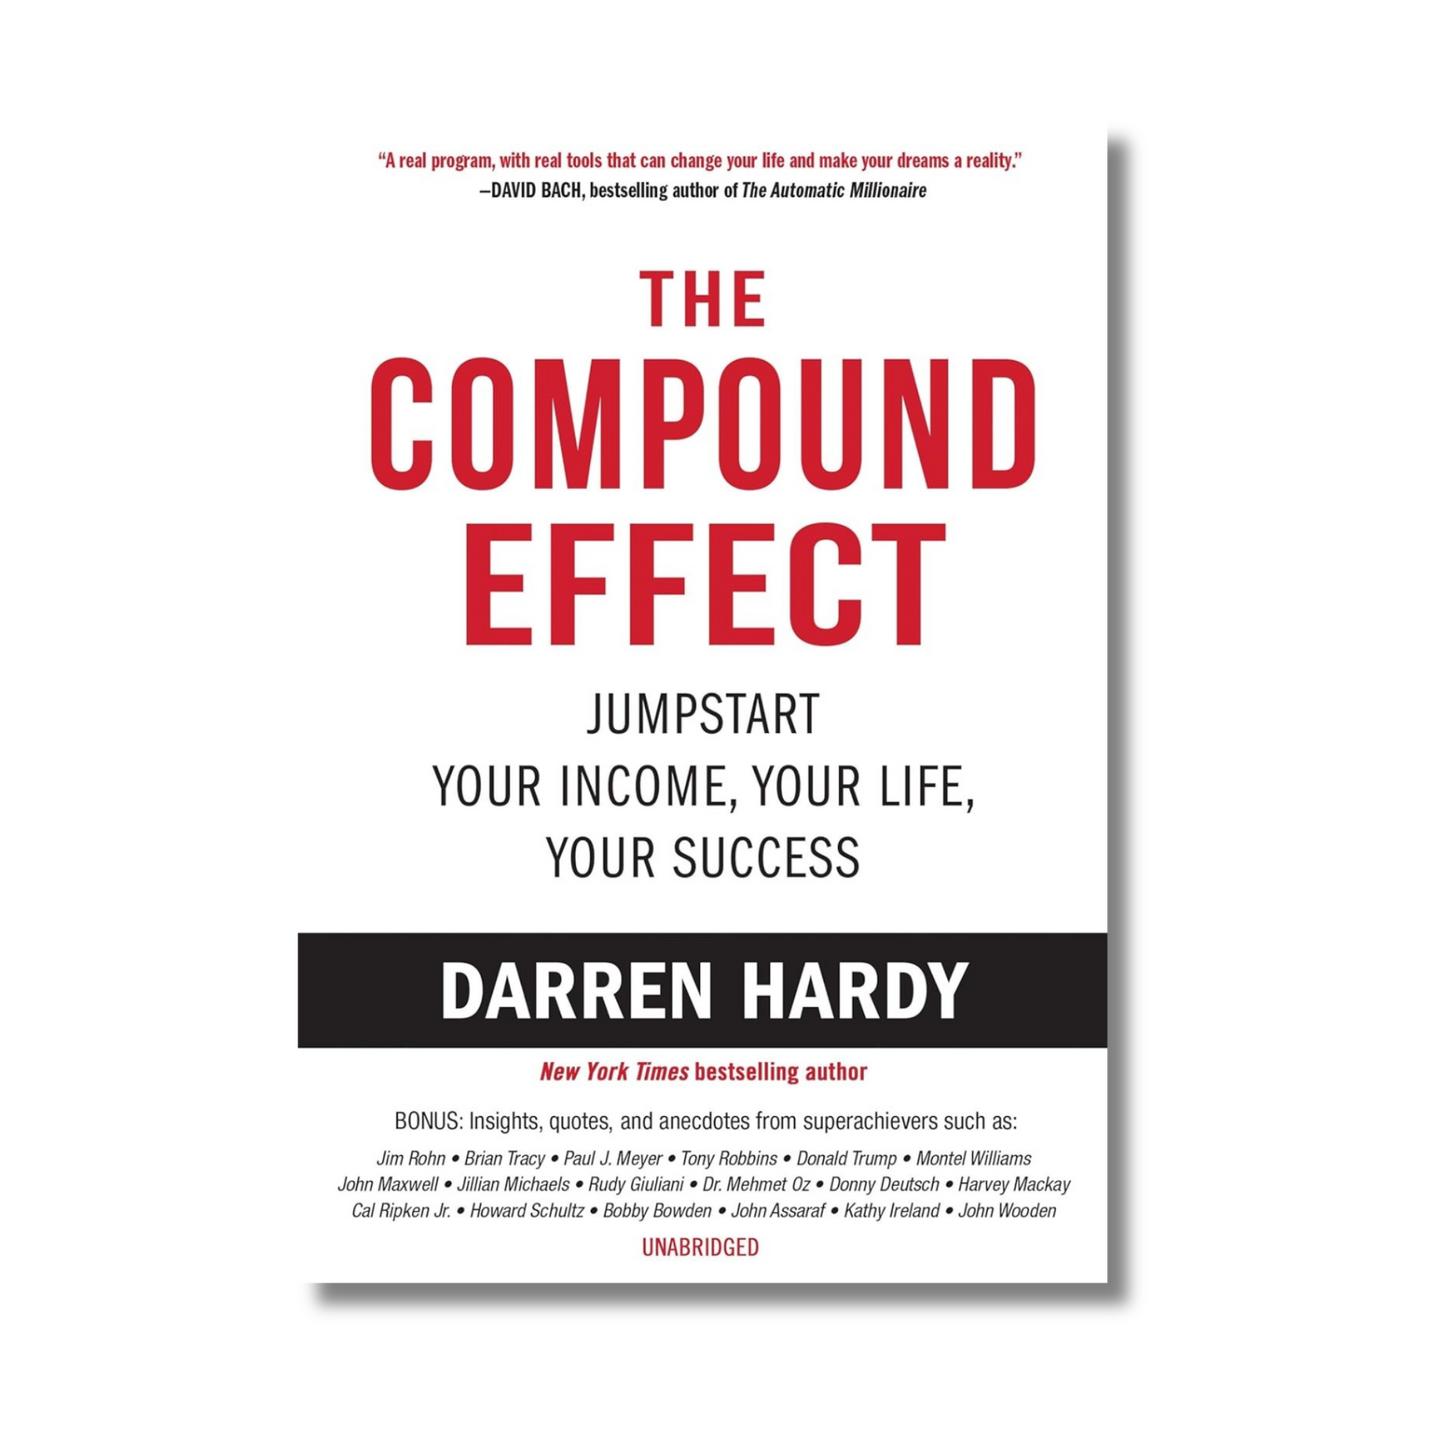 The Compound Effect by Darren Hardy (Paperback)